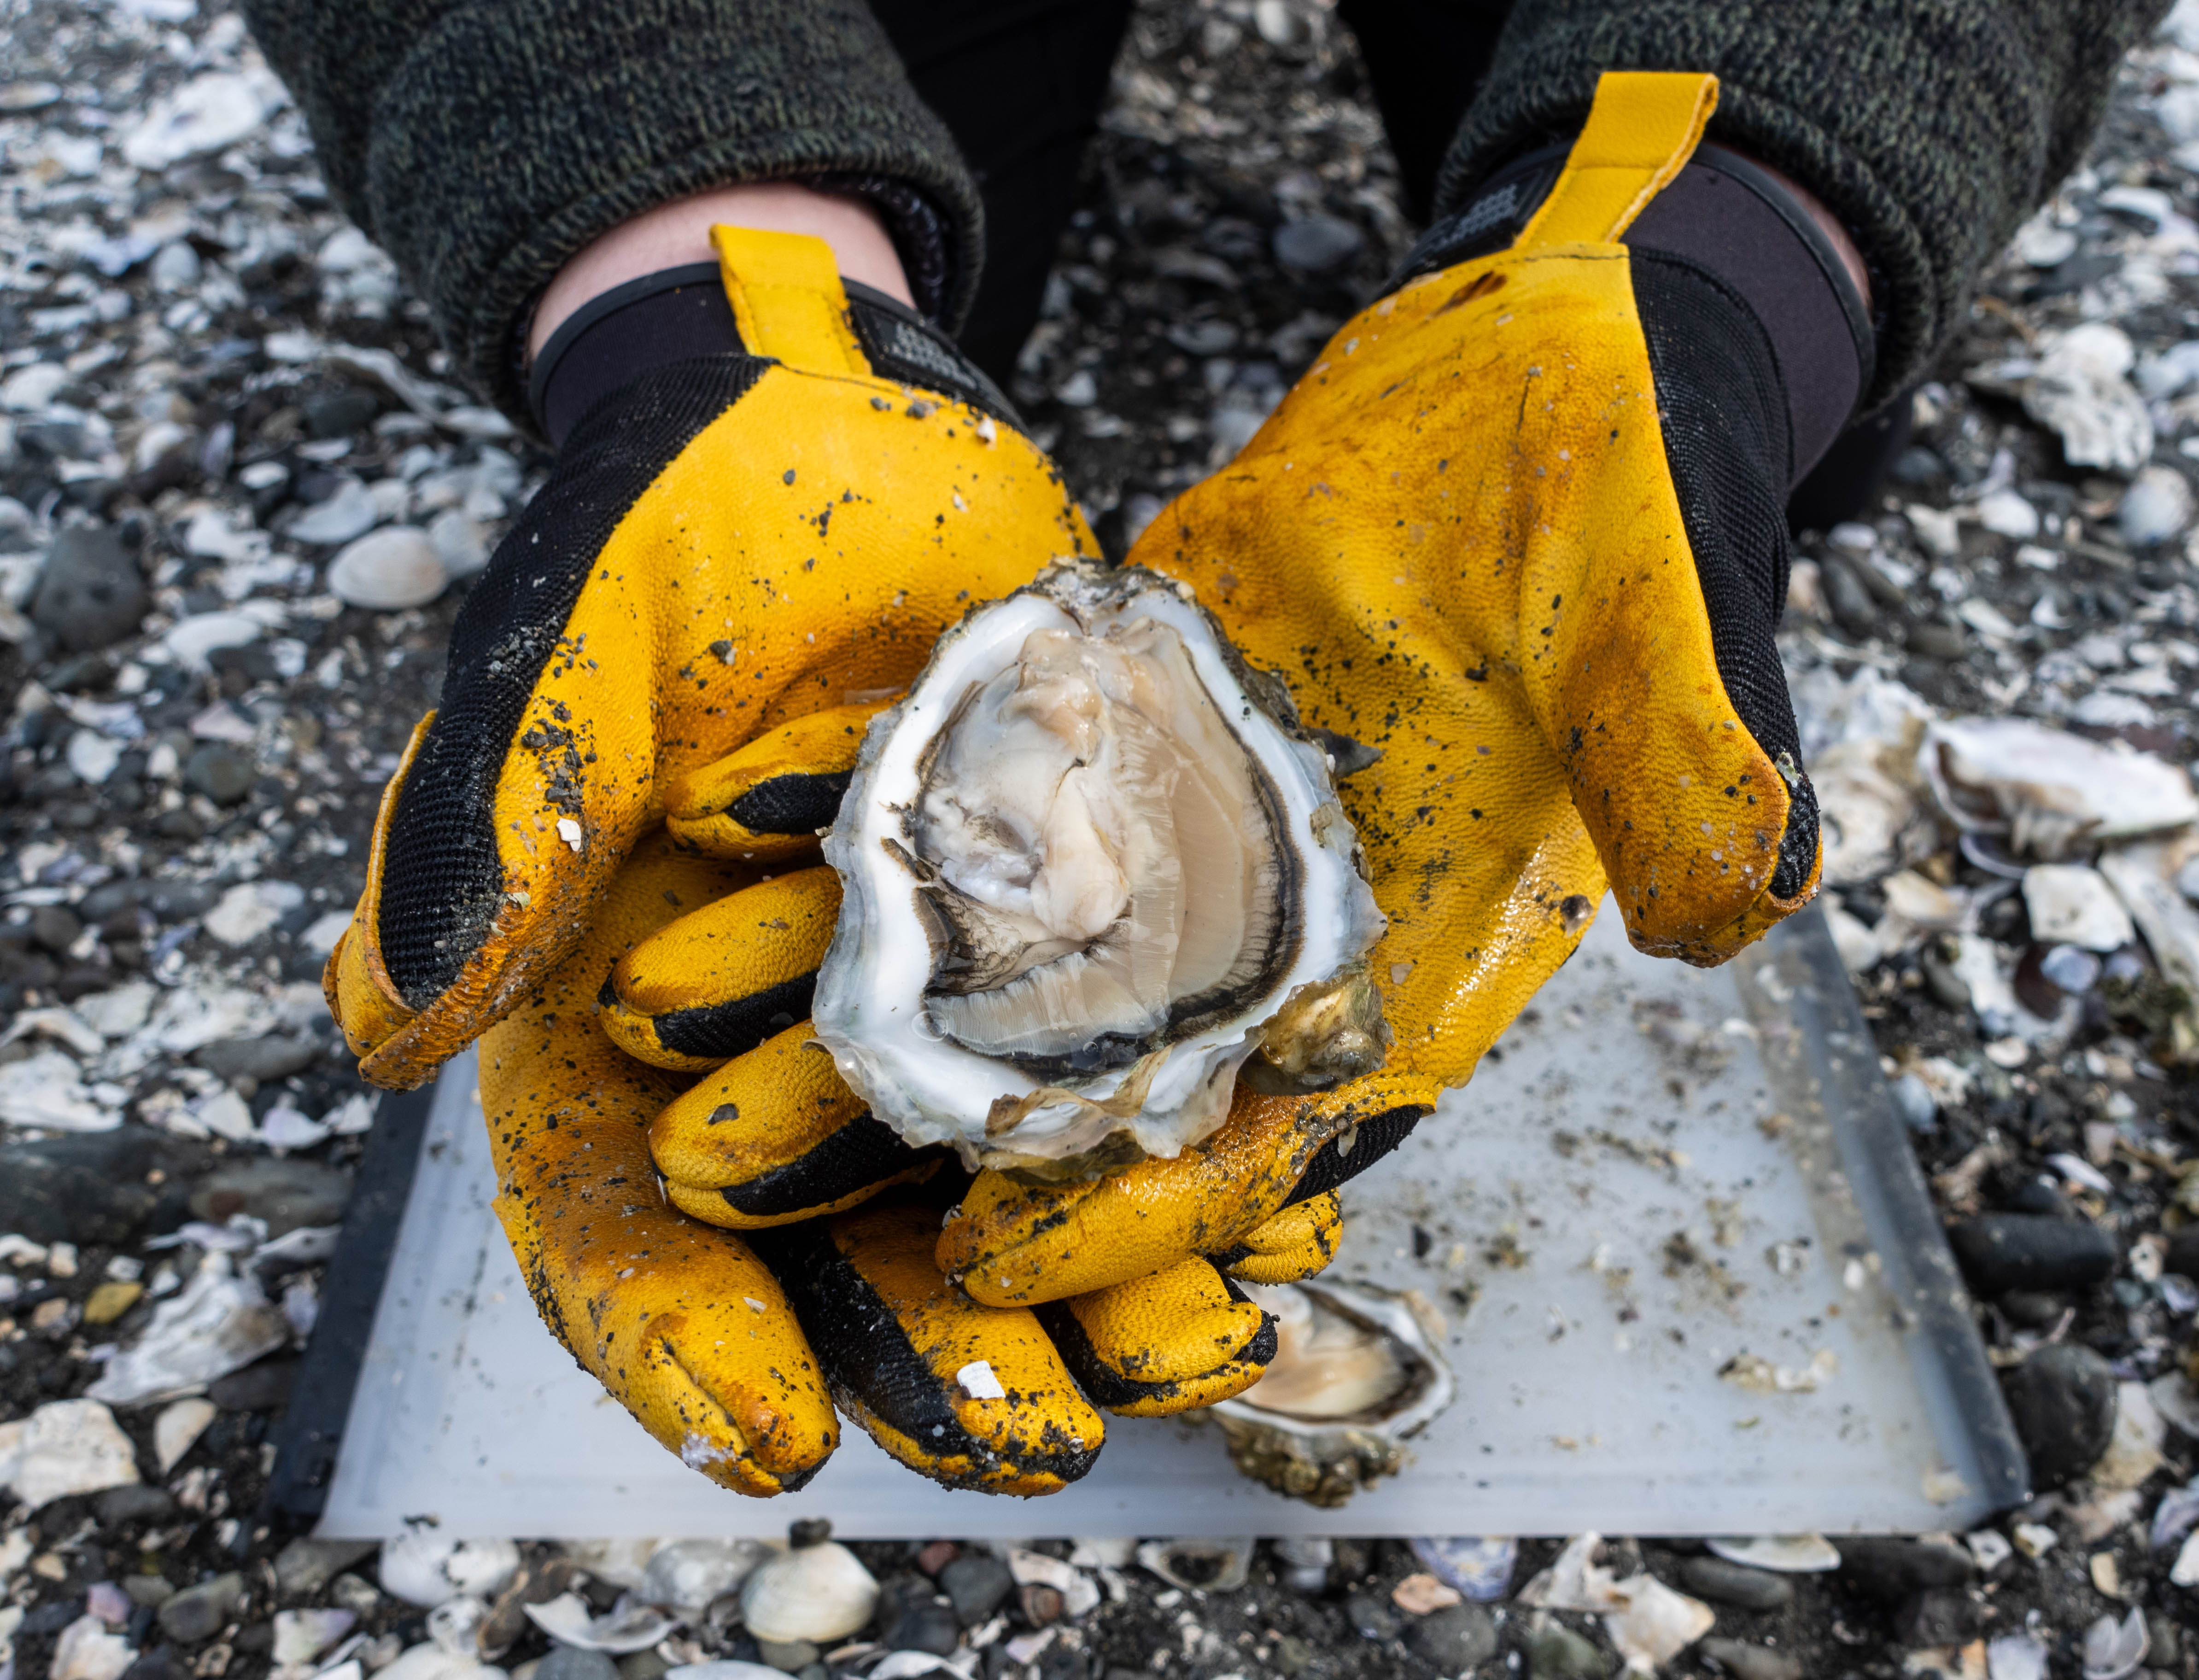 A pair of gloved hands holding an oyster on the half-shell.